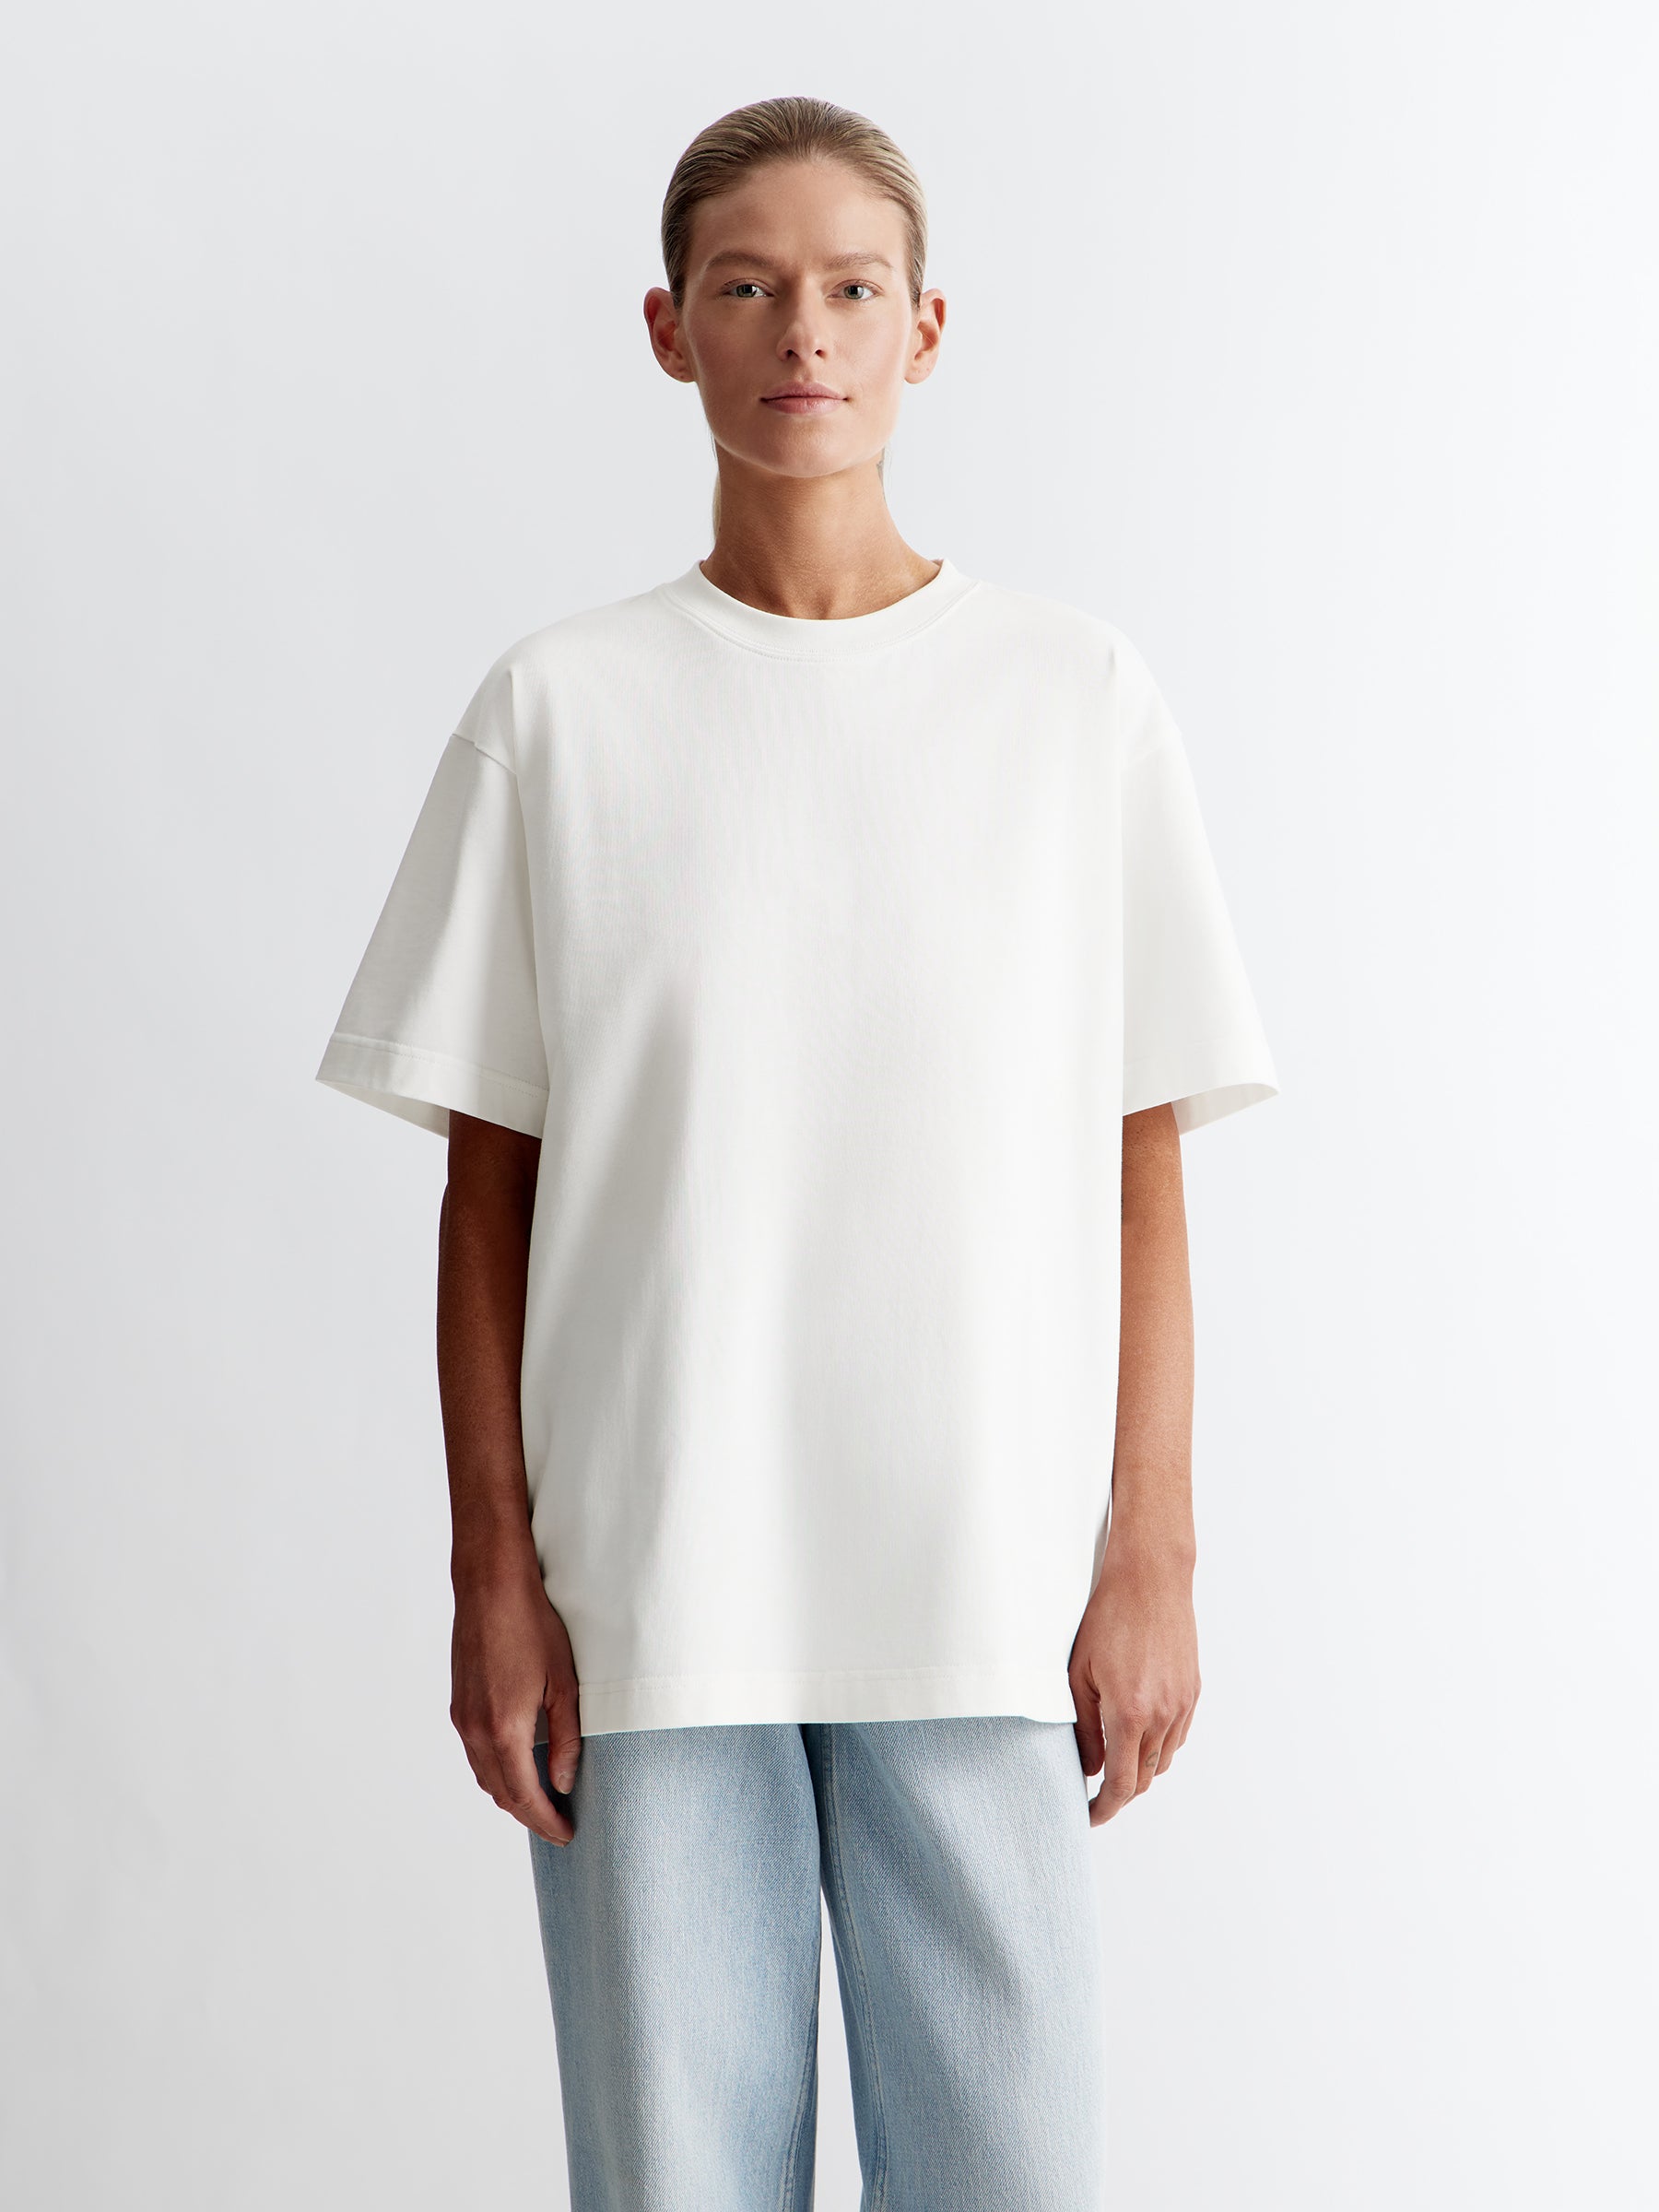 Oversized fit T-shirt